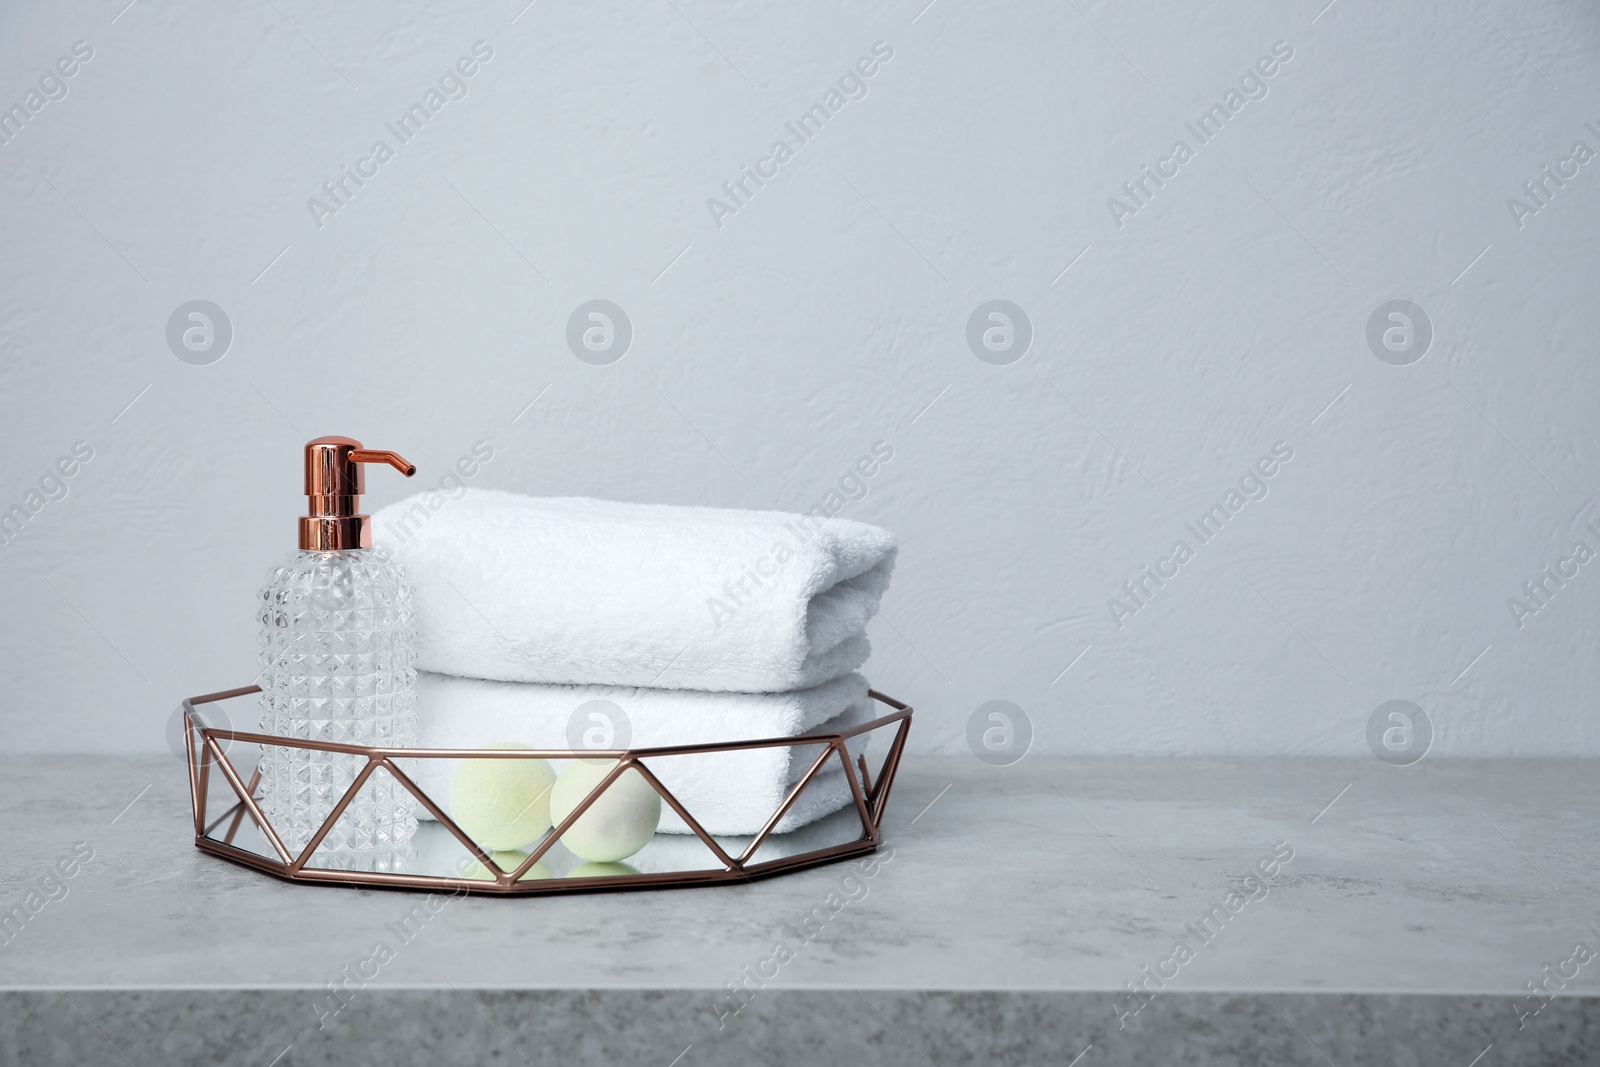 Photo of Tray with towels and toiletries on table against grey background